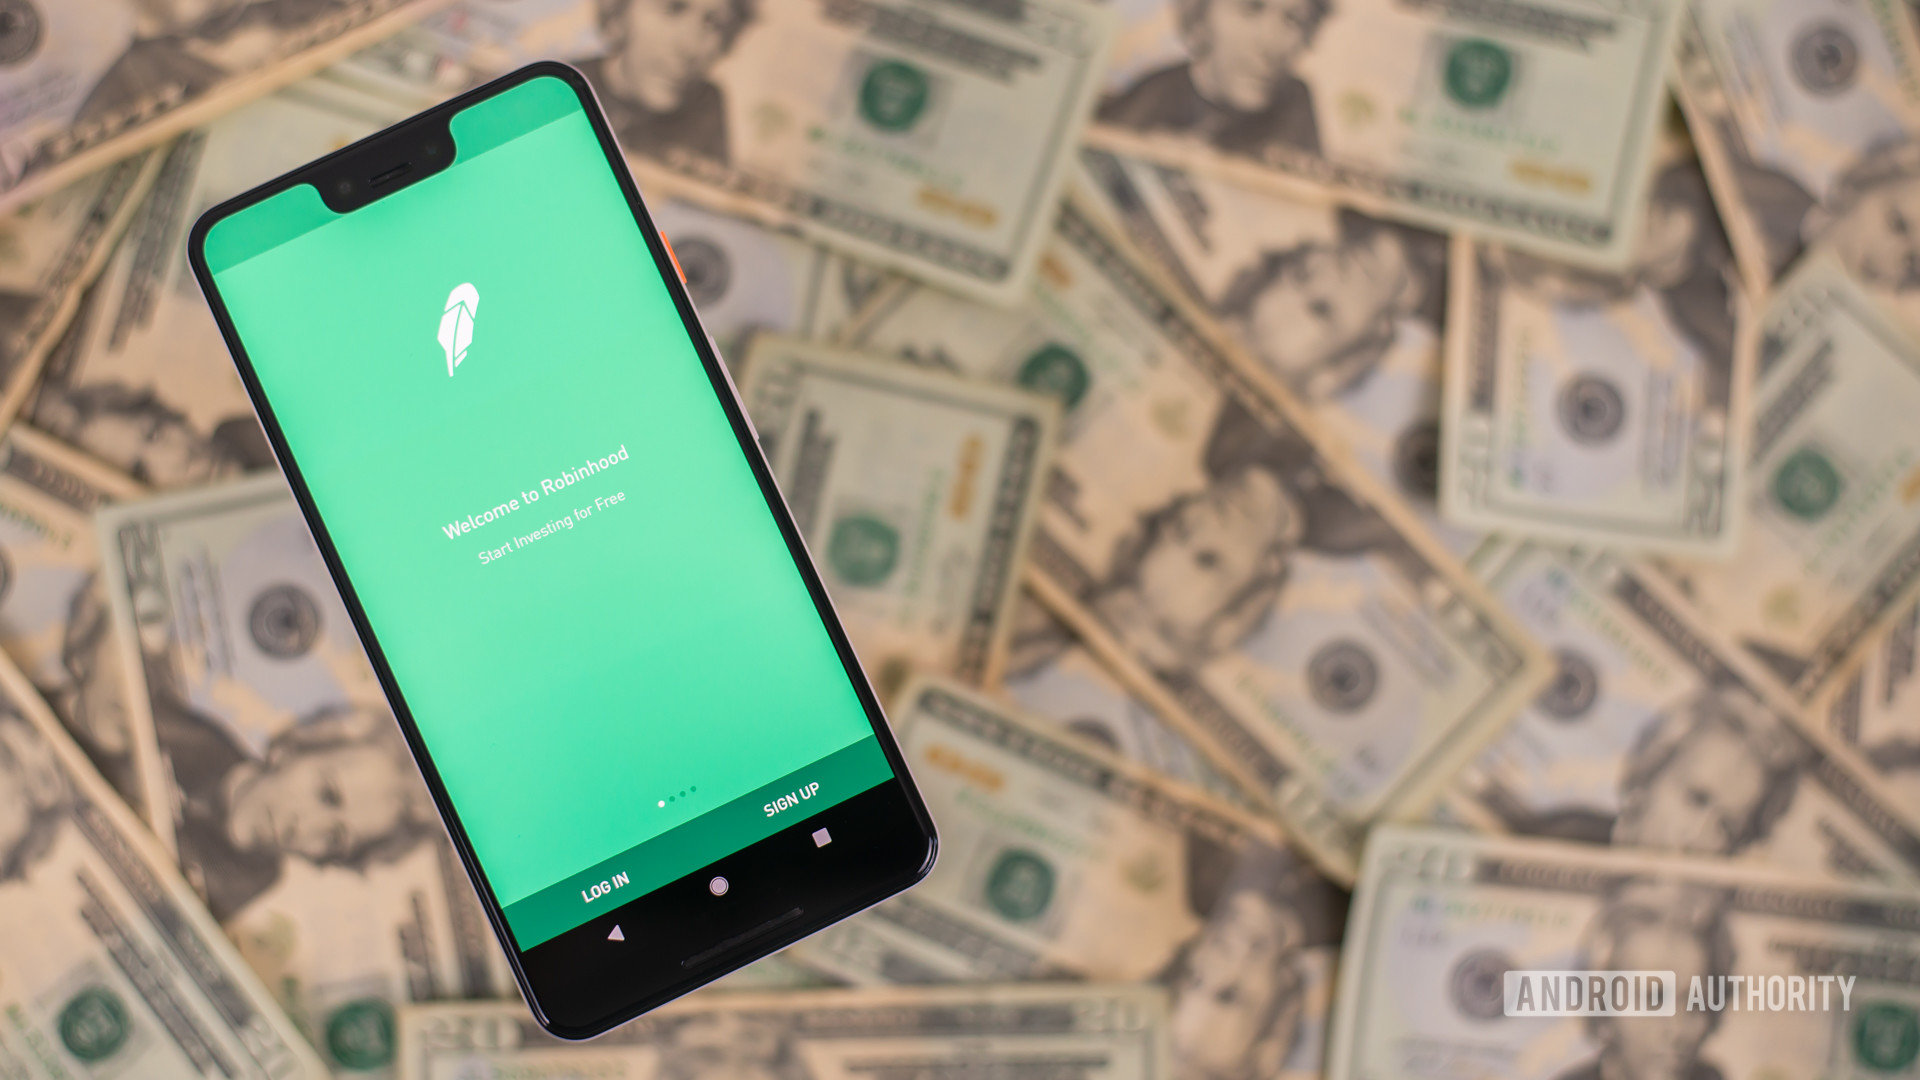 Robin Hood app on smartphone with money on background stock photo